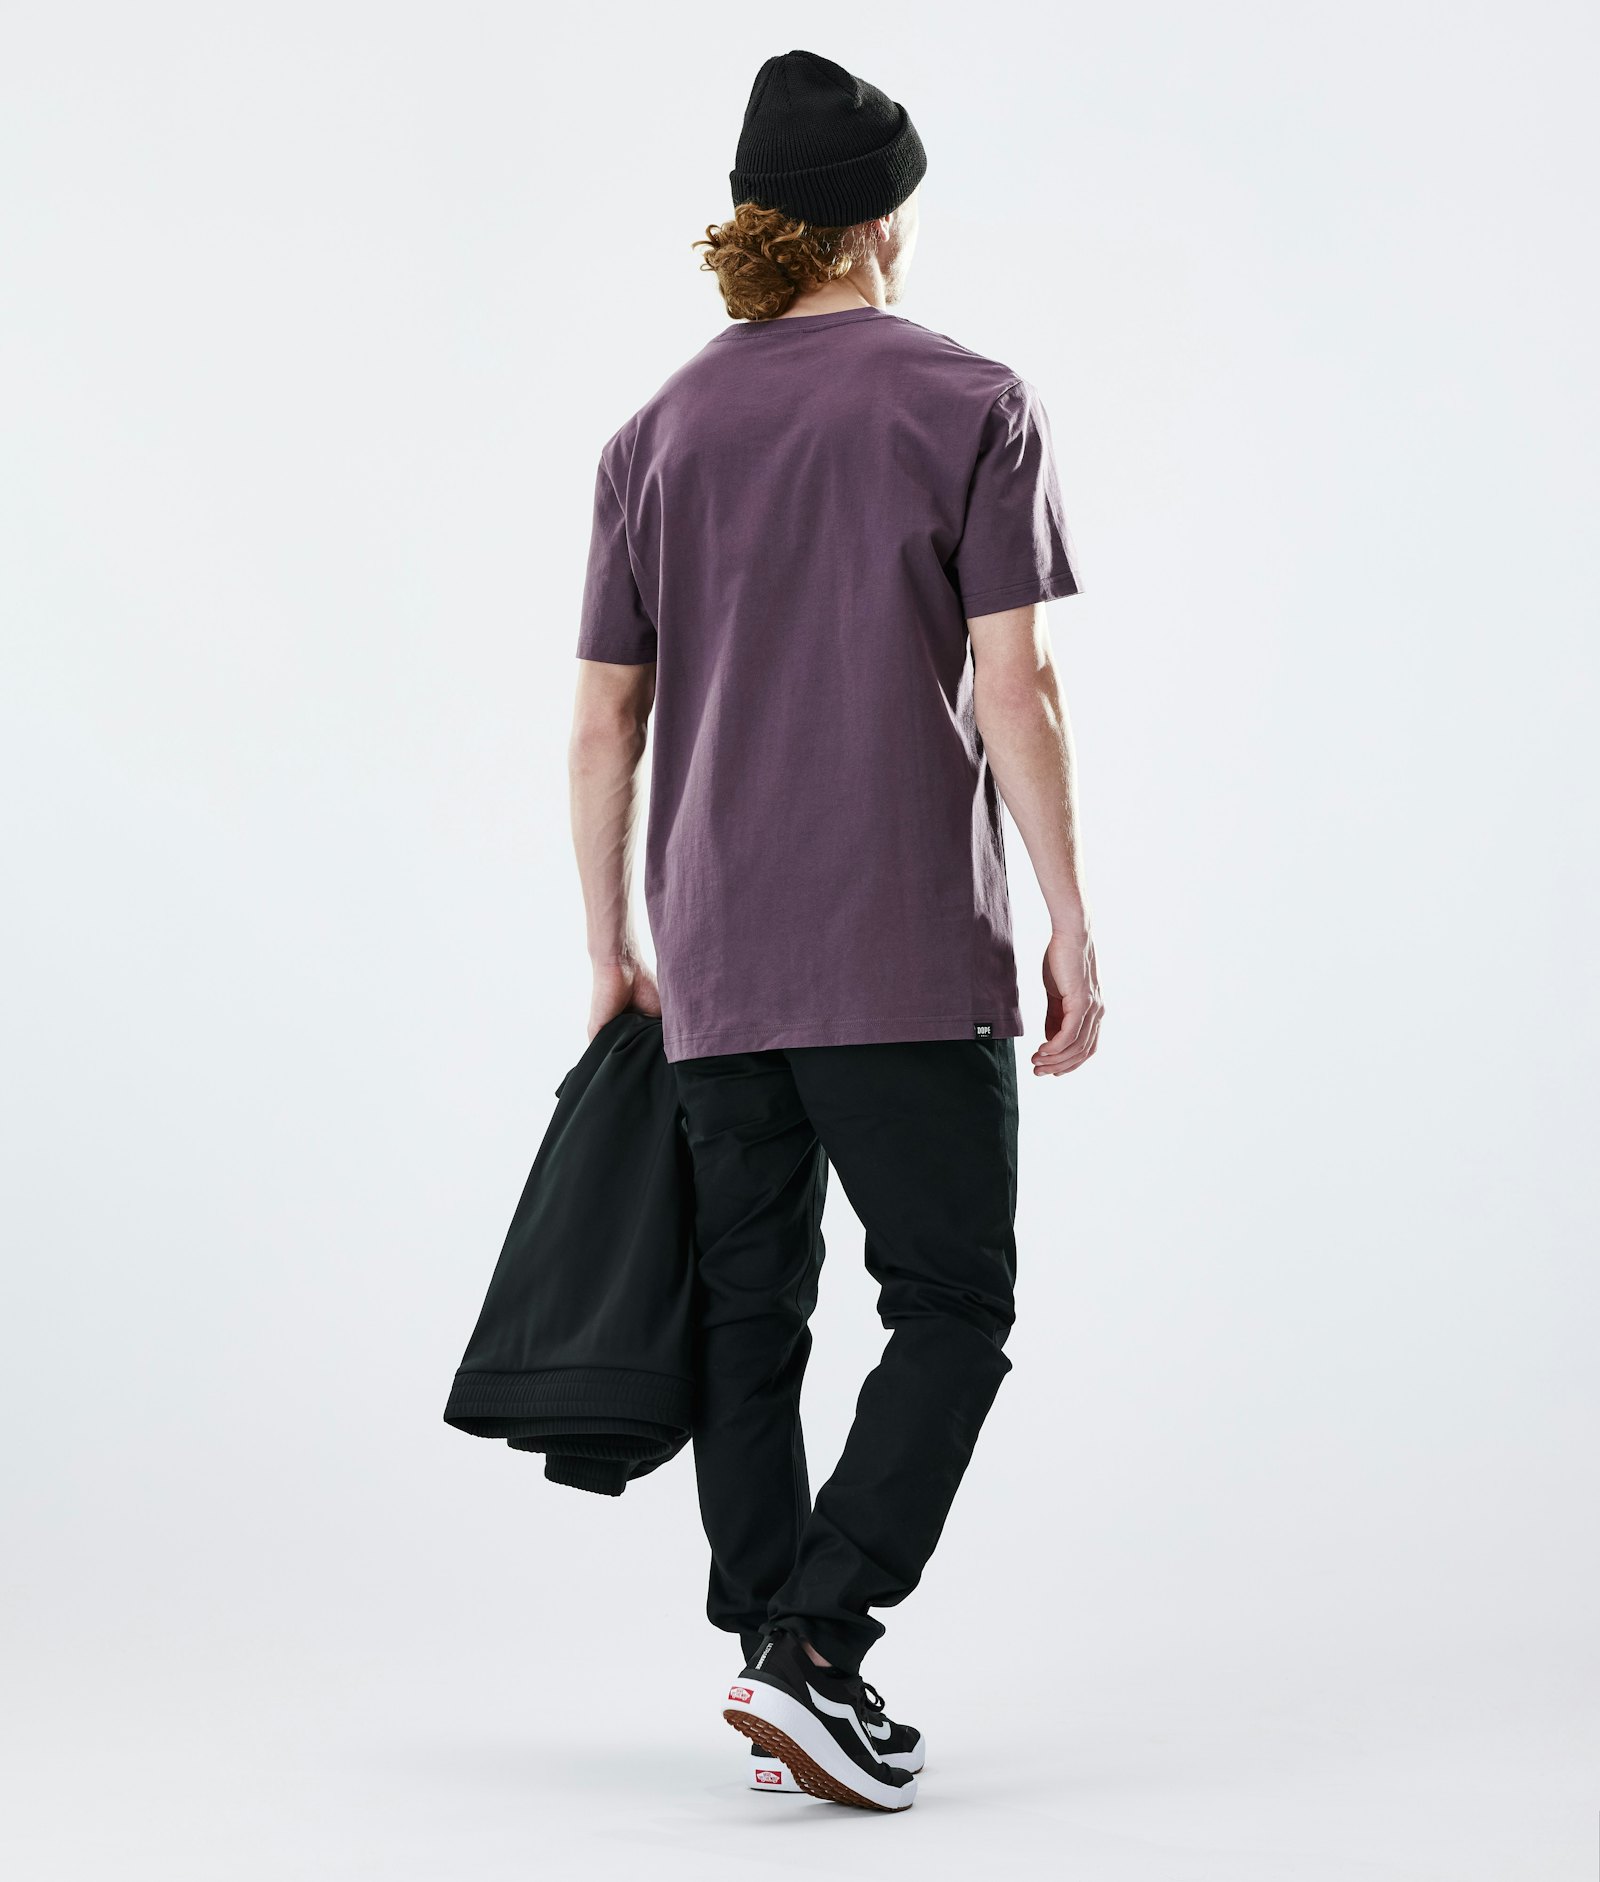 Dope Daily T-shirt Homme 2X-UP Faded Grape